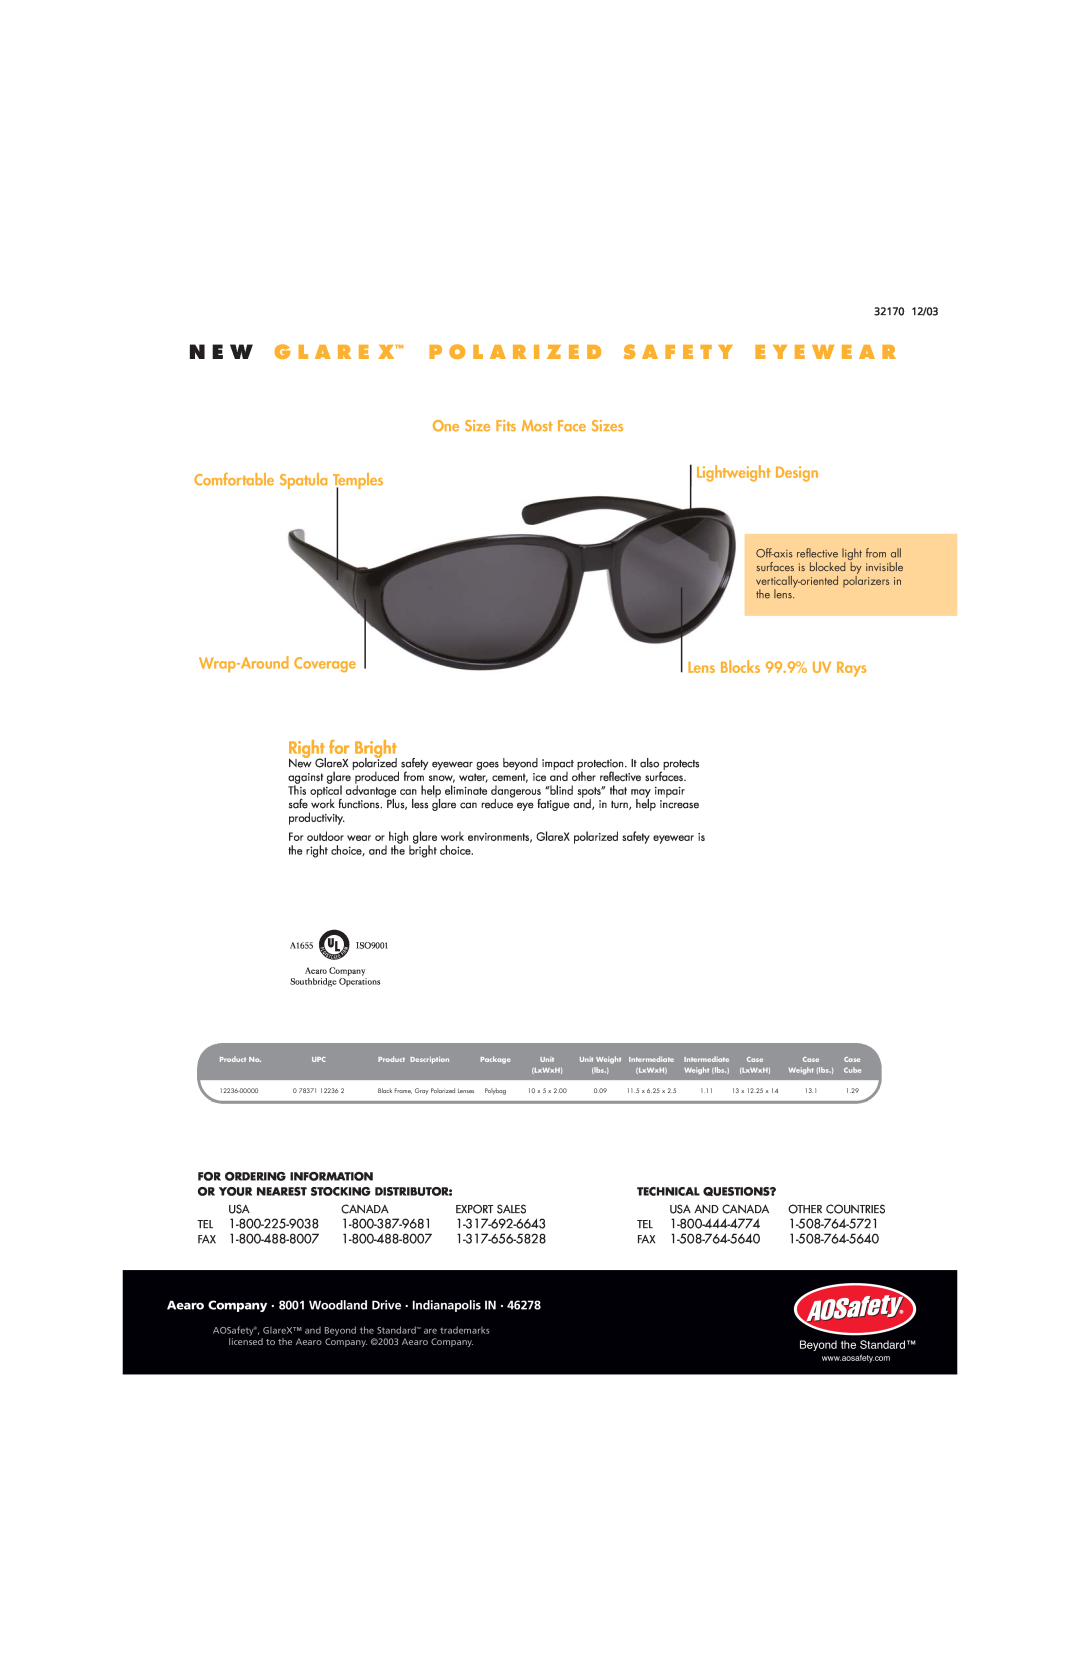 AOSafety GlareX manual Right for Bright, One Size Fits Most Face Sizes, Comfortable Spatula Temples, Lightweight Design 